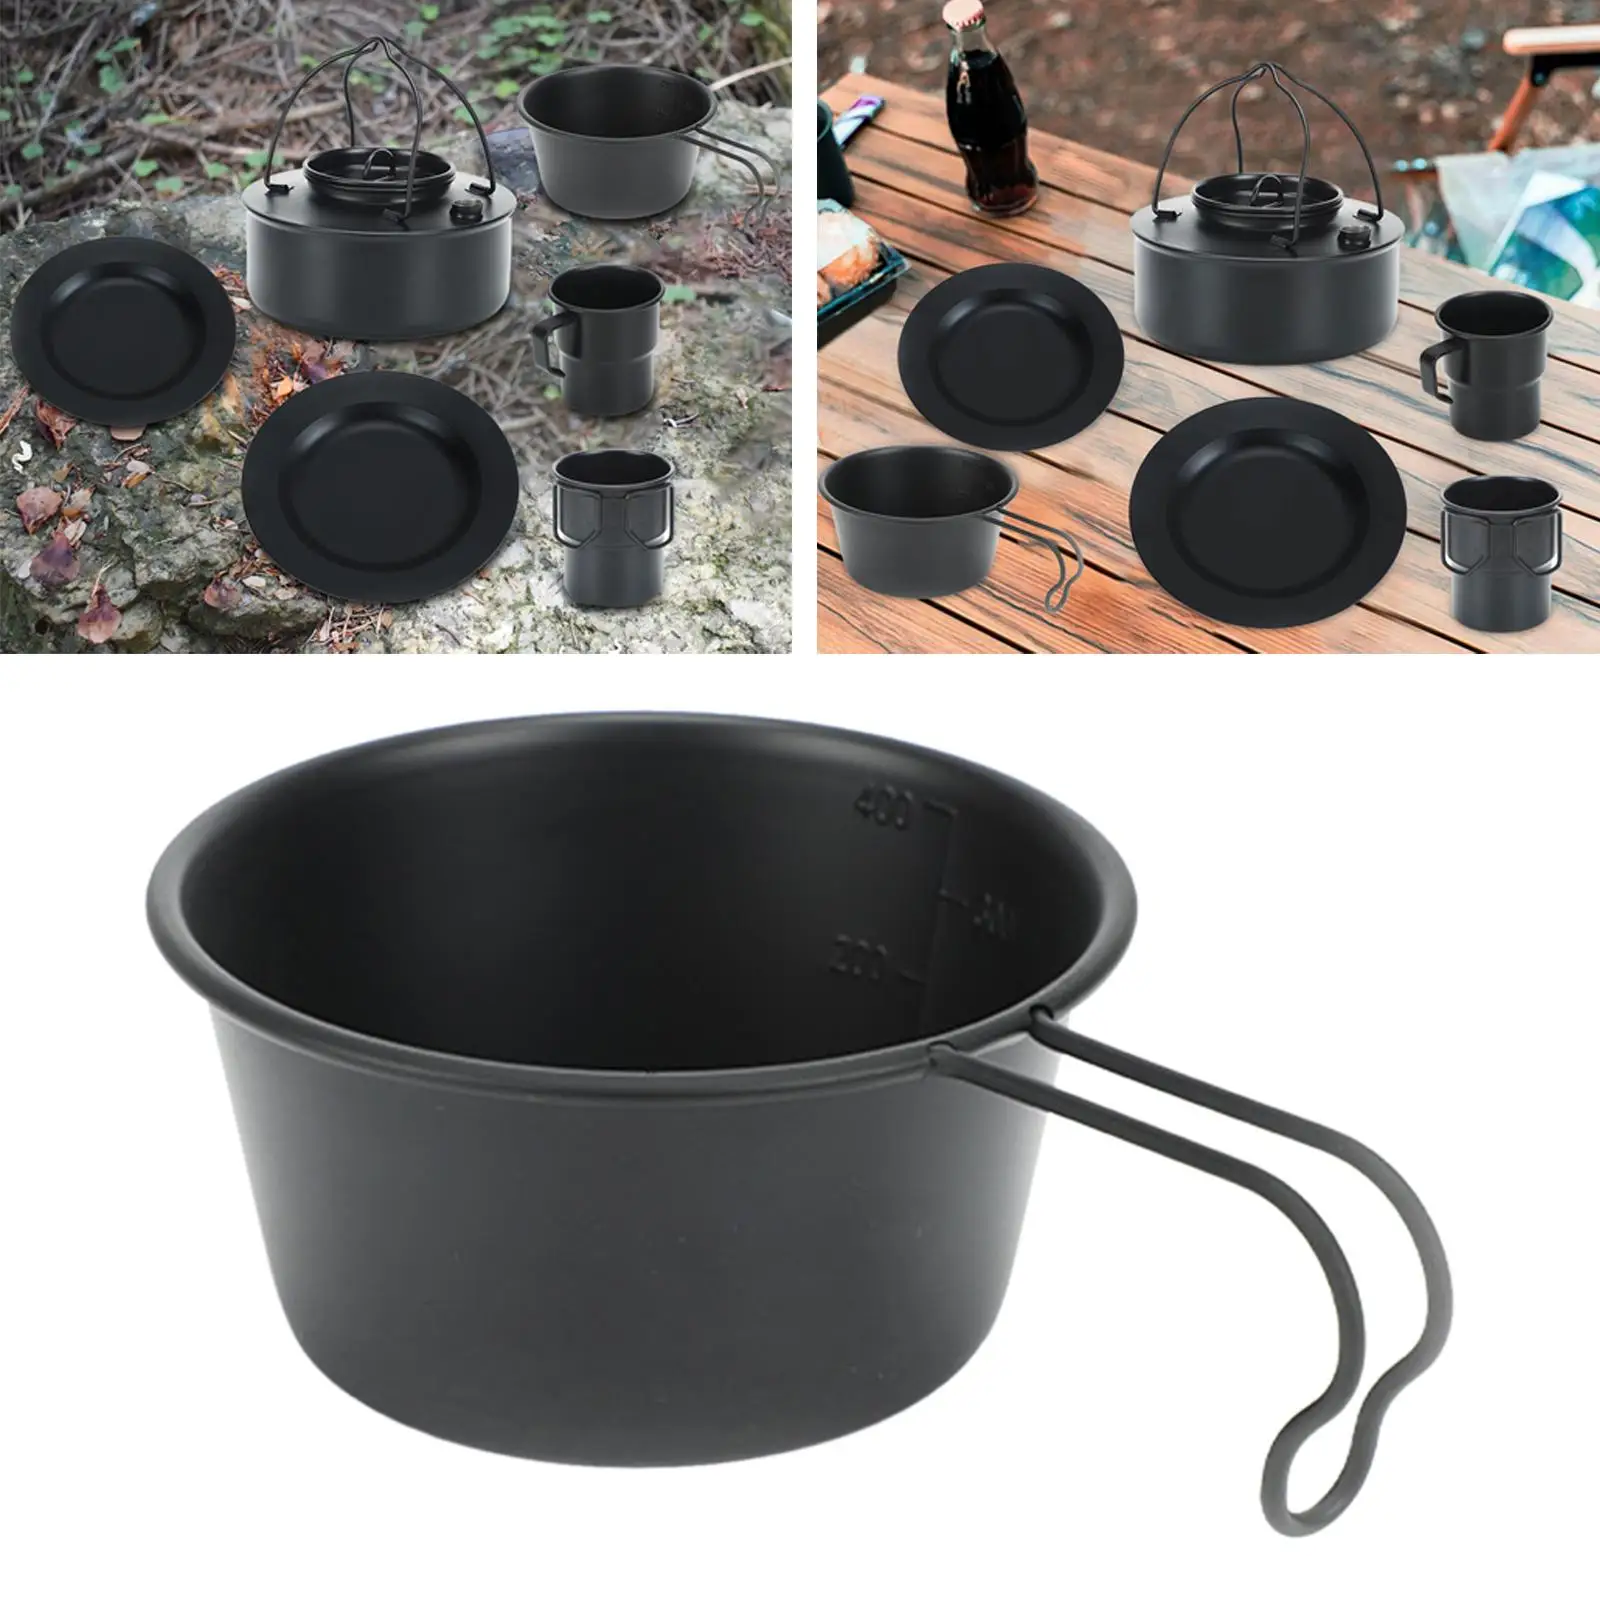 Lightweight Camping Bowl with Handle Utensil Stovetop Pot Outdoor Dinnerware for Fishing Hiking Backpacking Picnic Travel